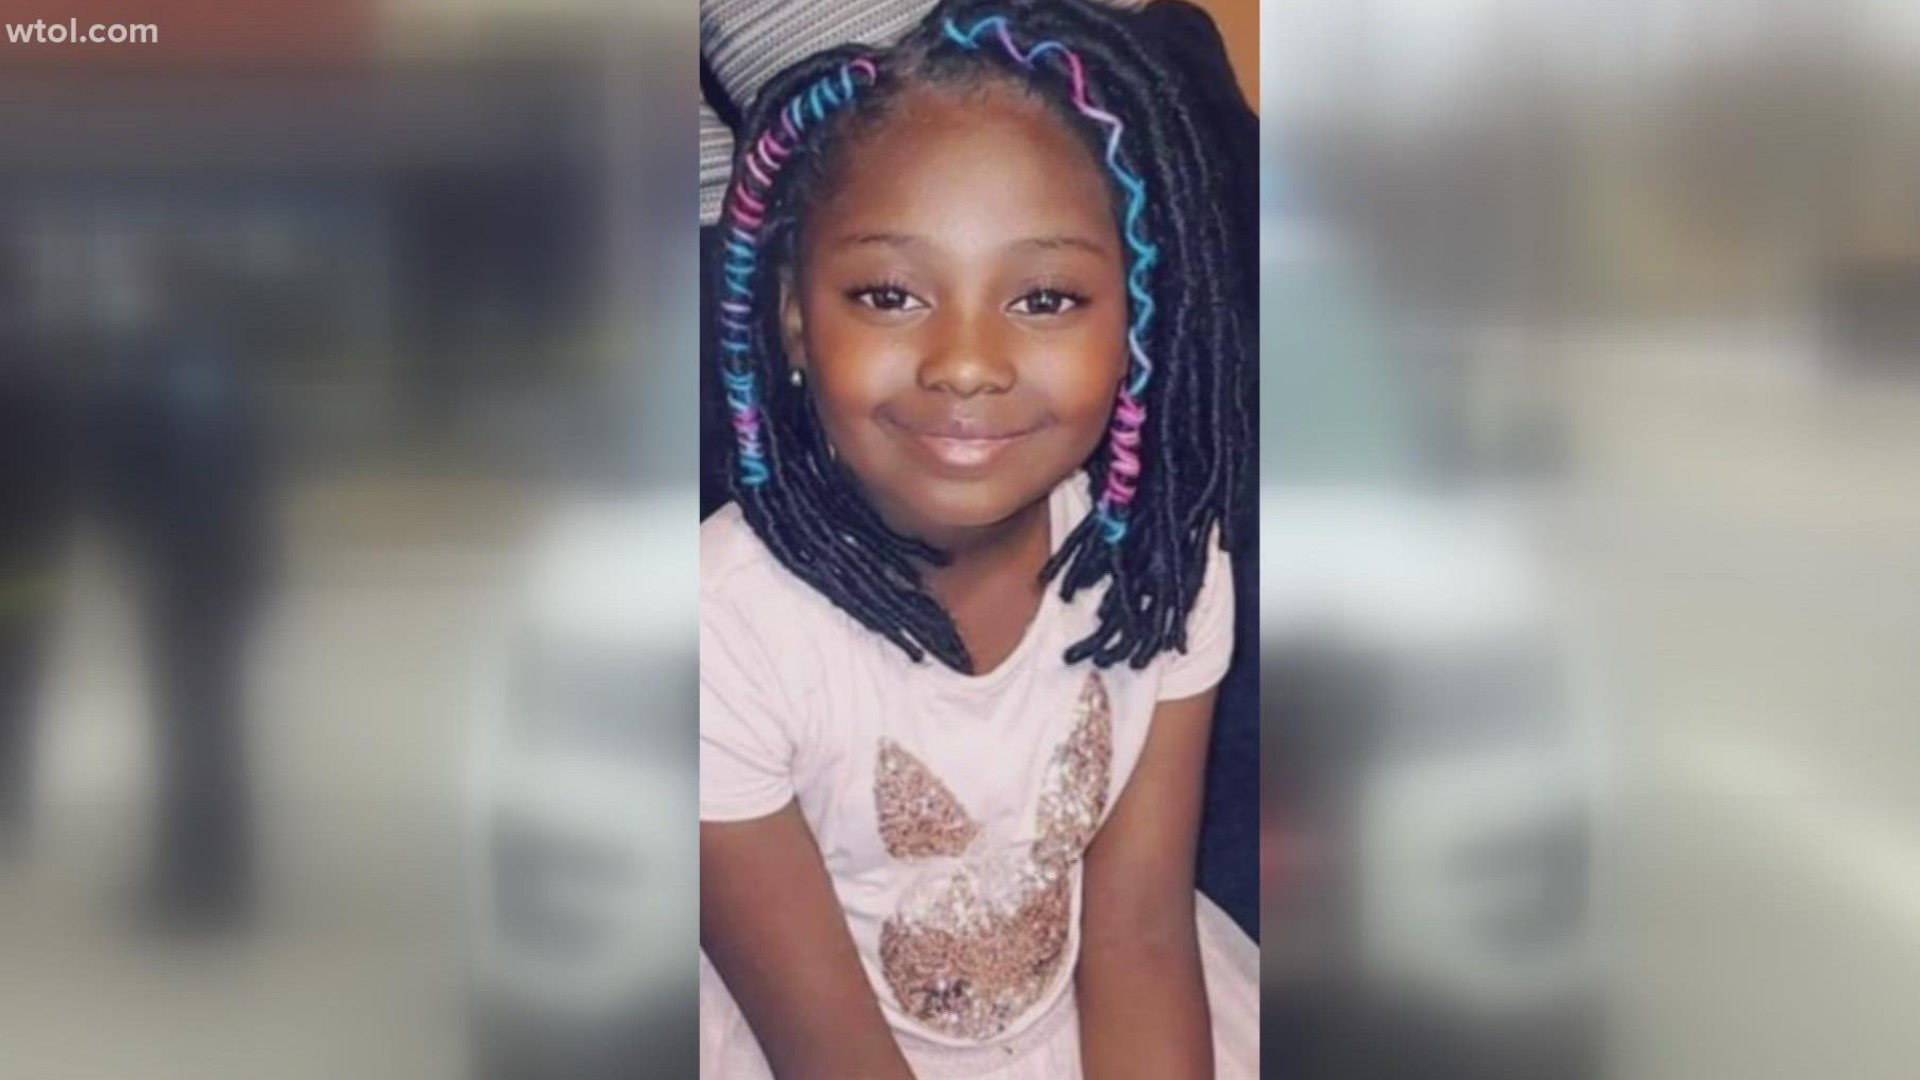 A 10-year old girl lost her life in what police call a drive-by shooting in the Old West End